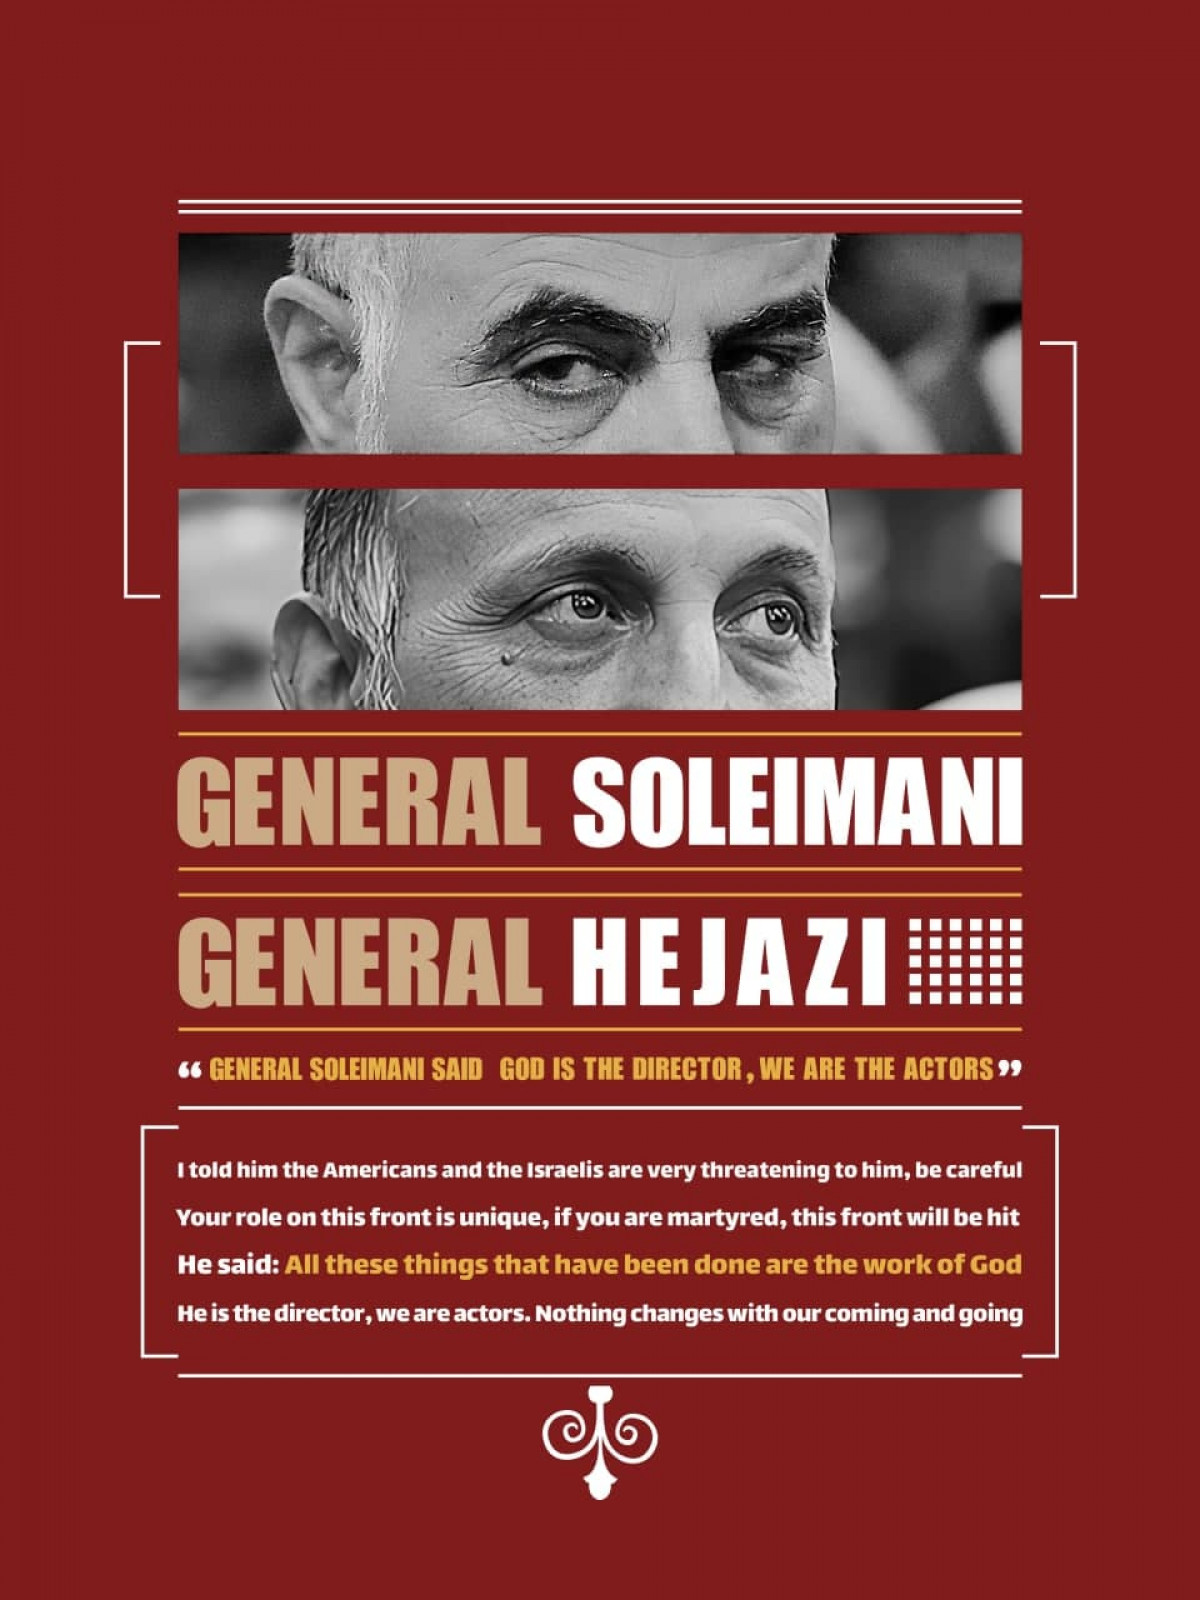 GENERAL SOLEIMANI SAID GOD IS THE DIRECTOR, WE ARE THE ACTORS